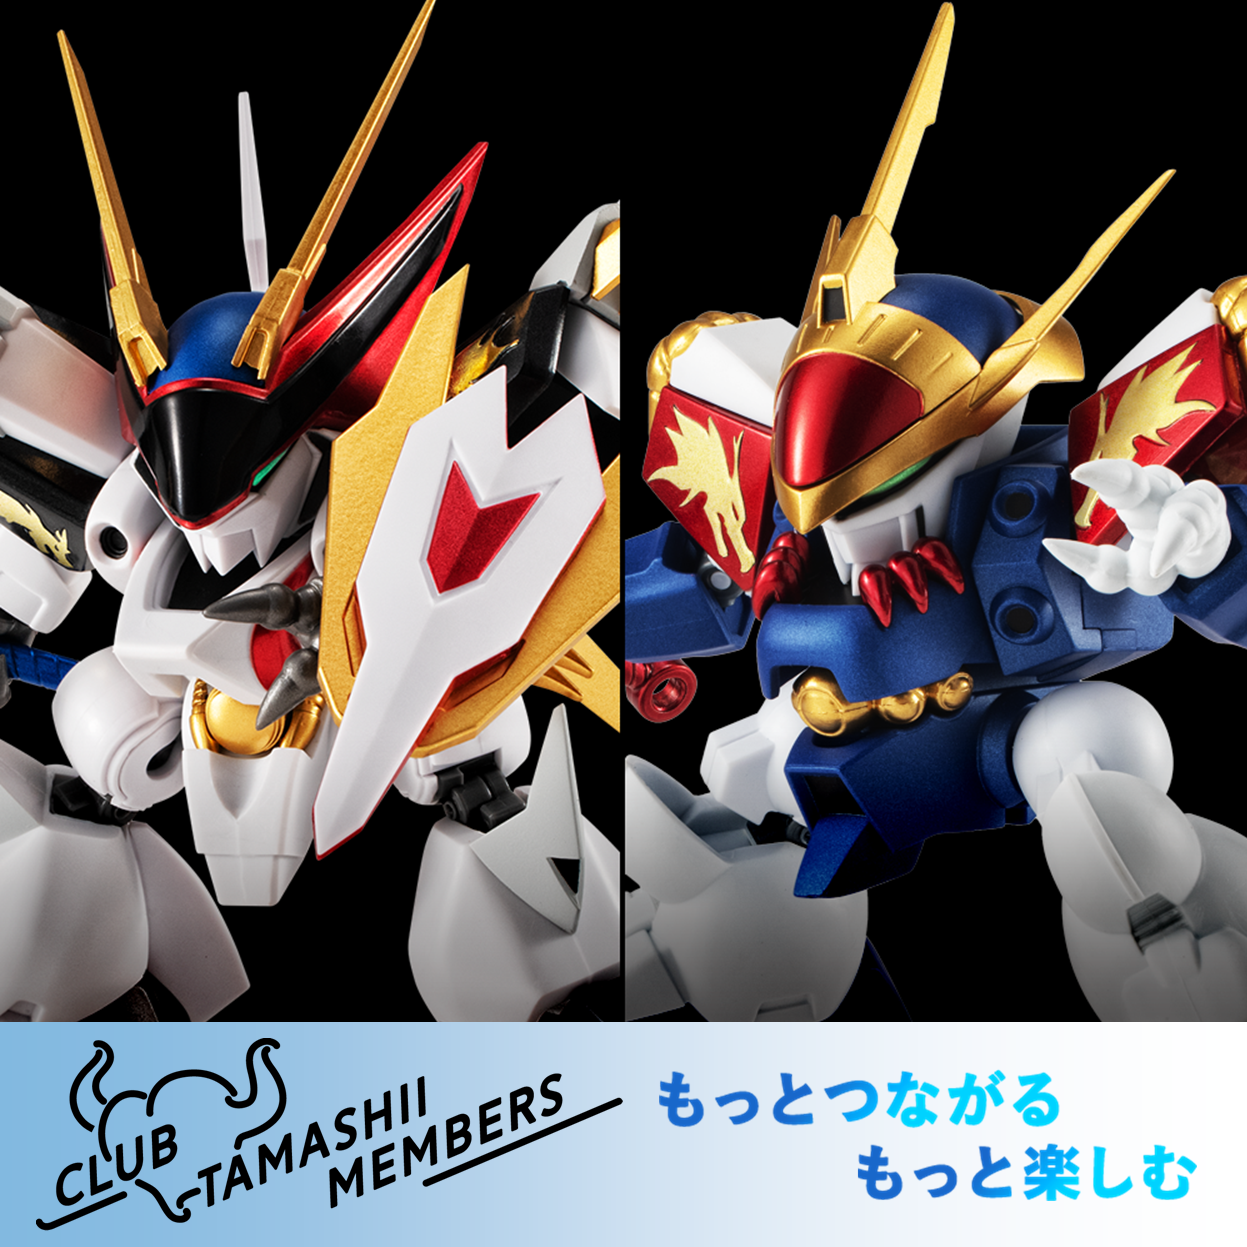 Advance reservations (lottery) for two products exclusive to the domestic TAMASHII STORE Store